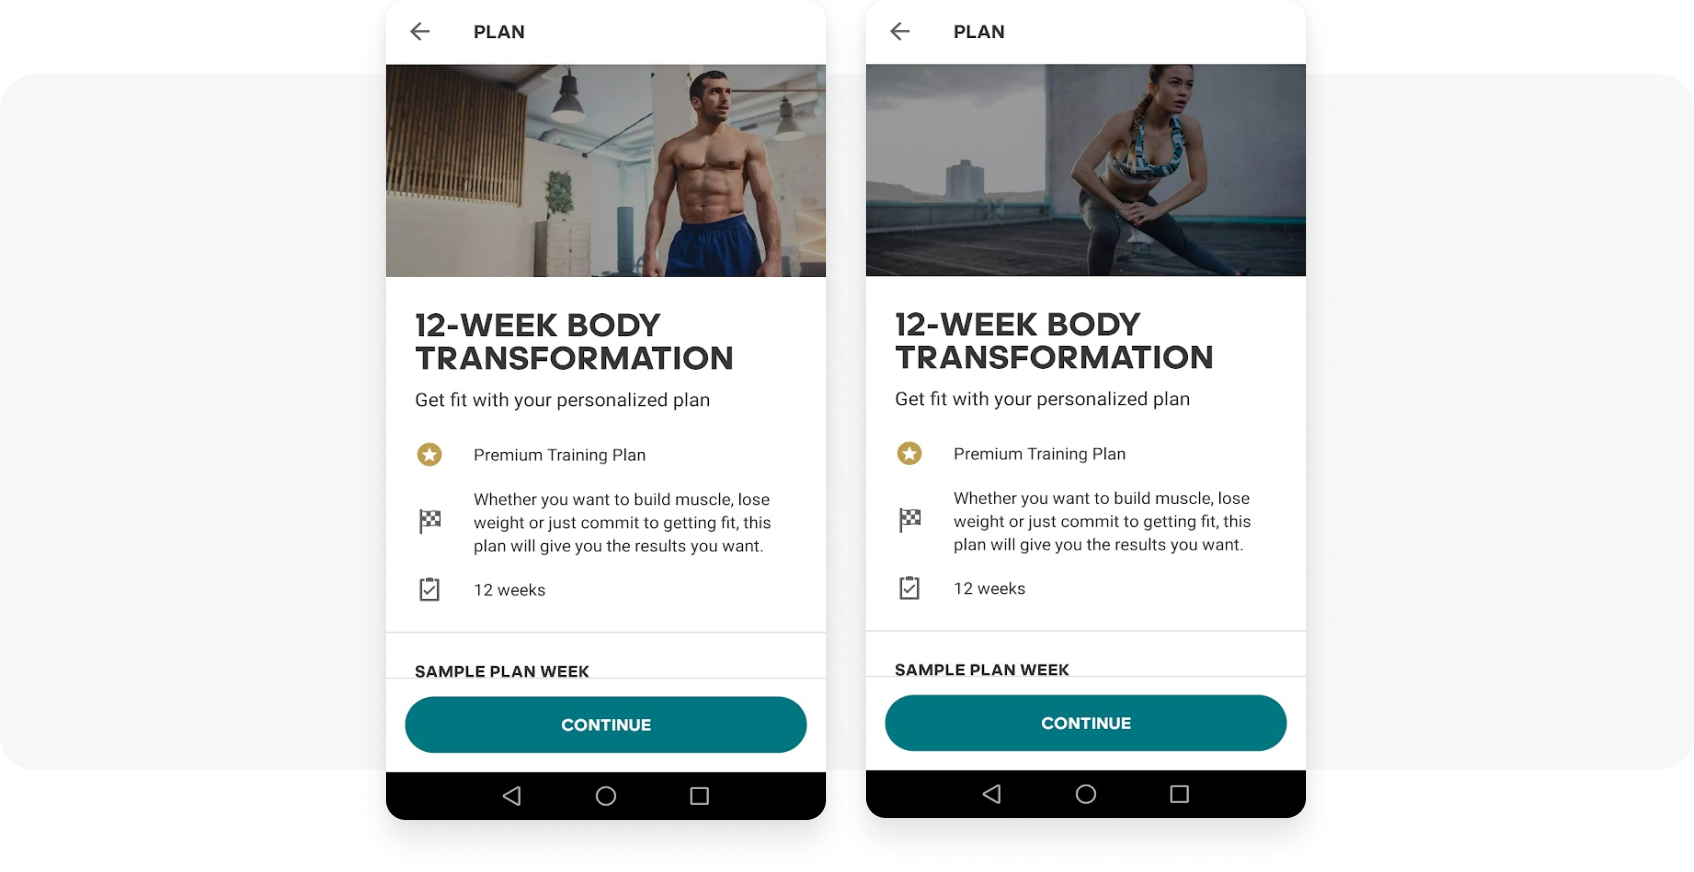 Premium subscription in-apps from a fitness app